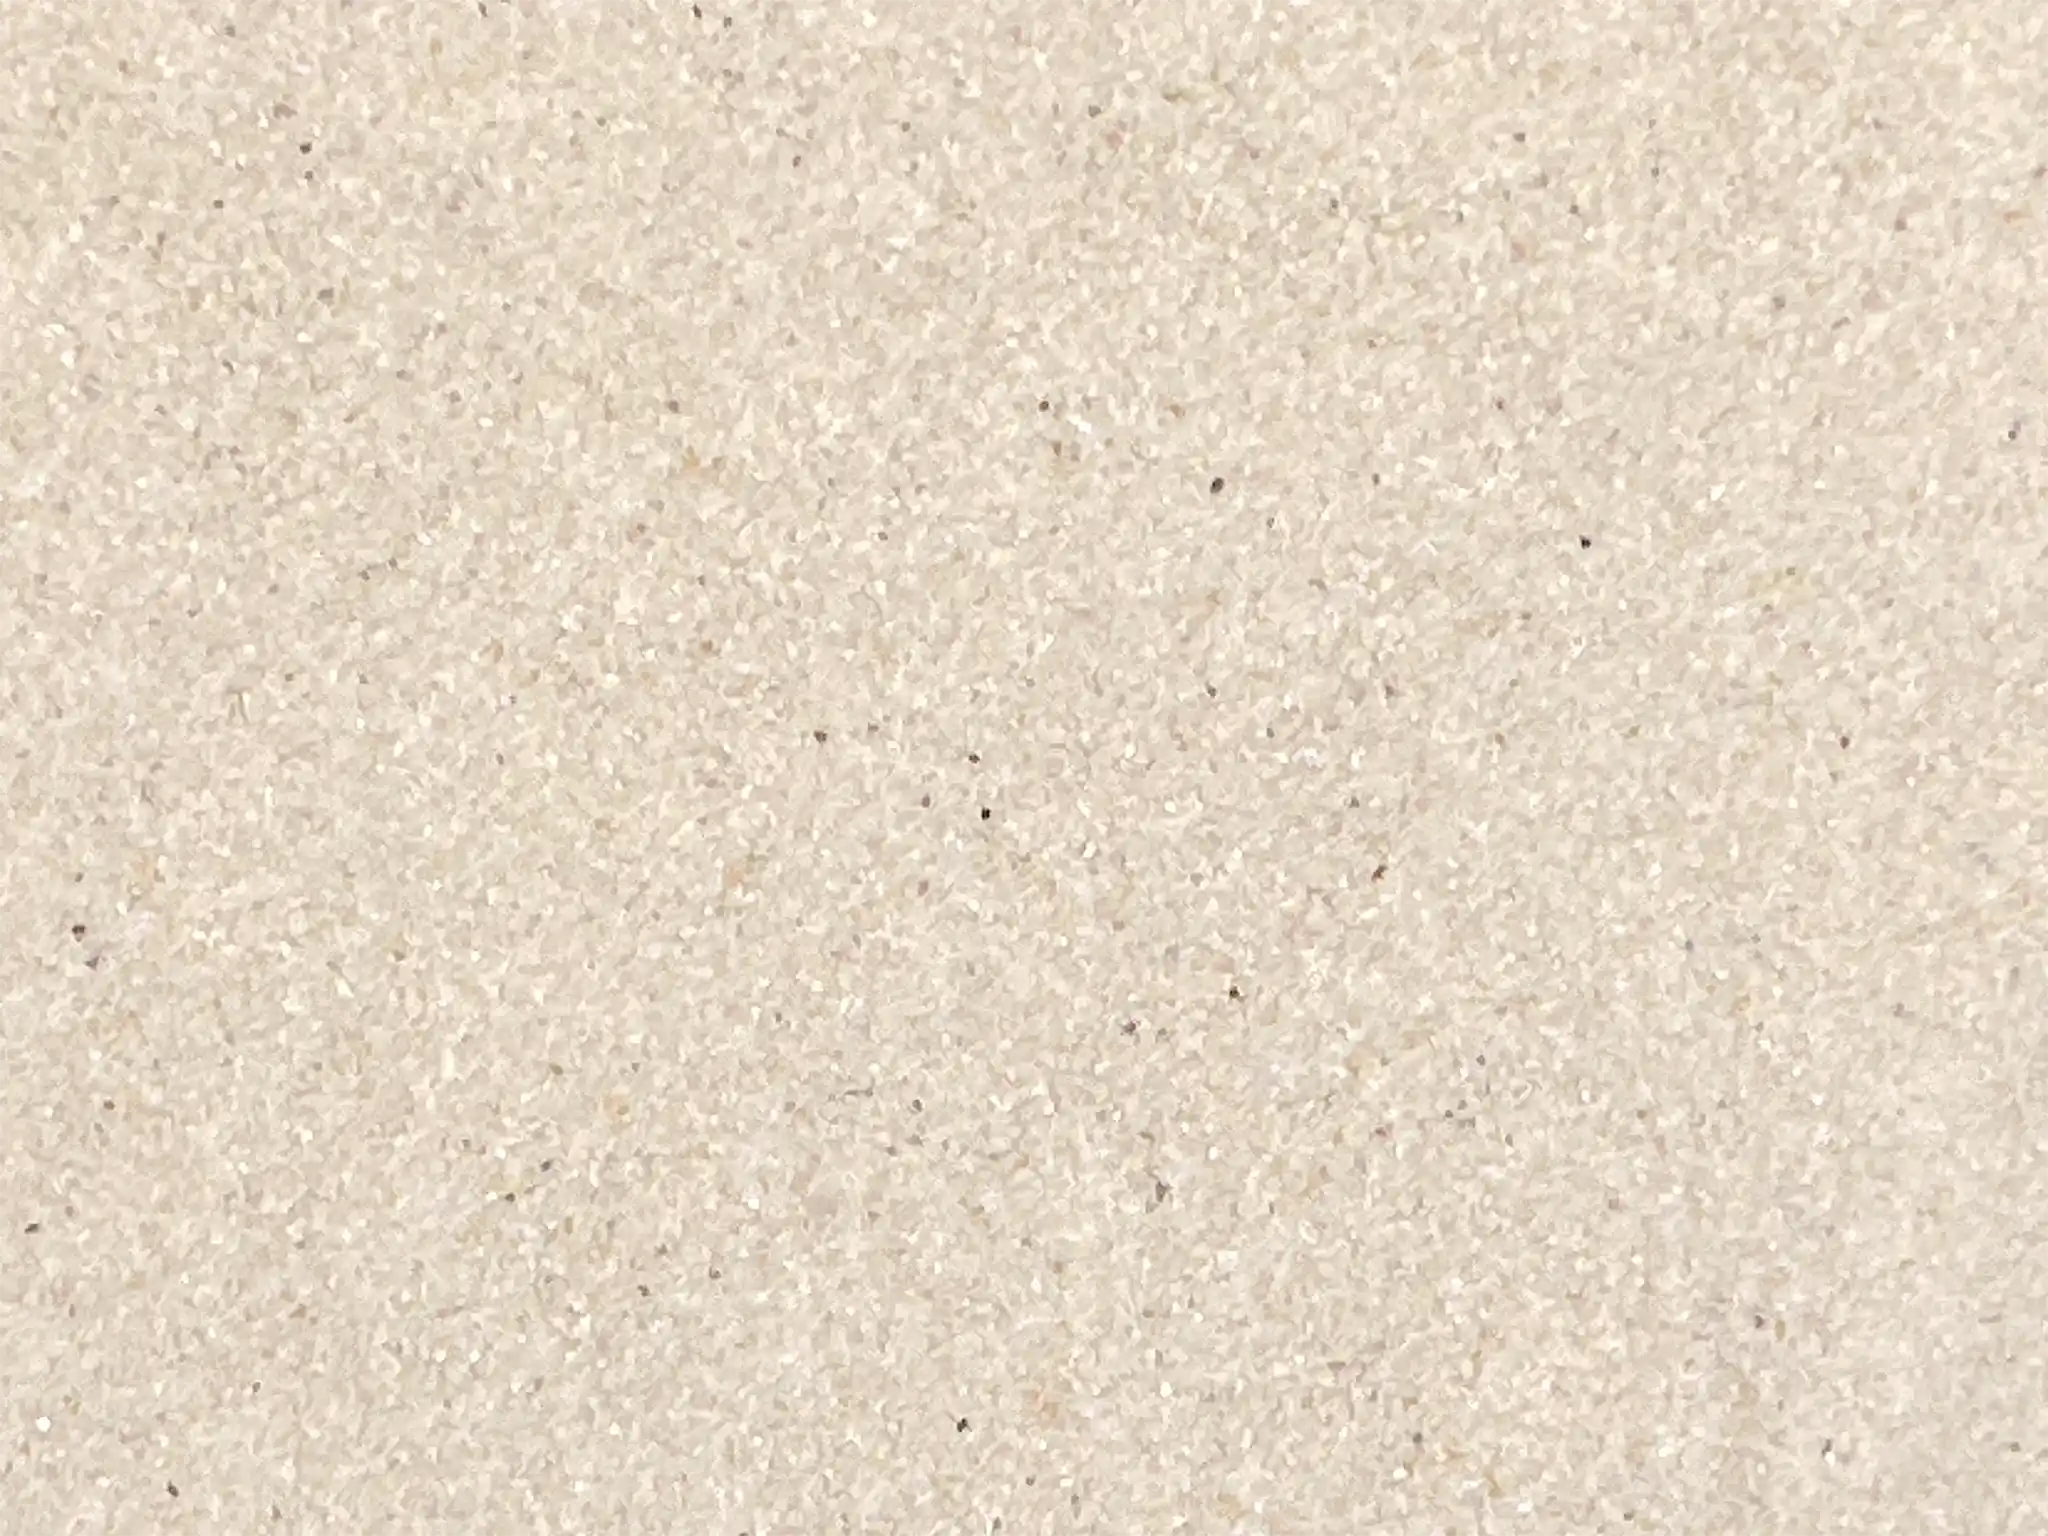 A close-up view of Kiln Dried Sand.